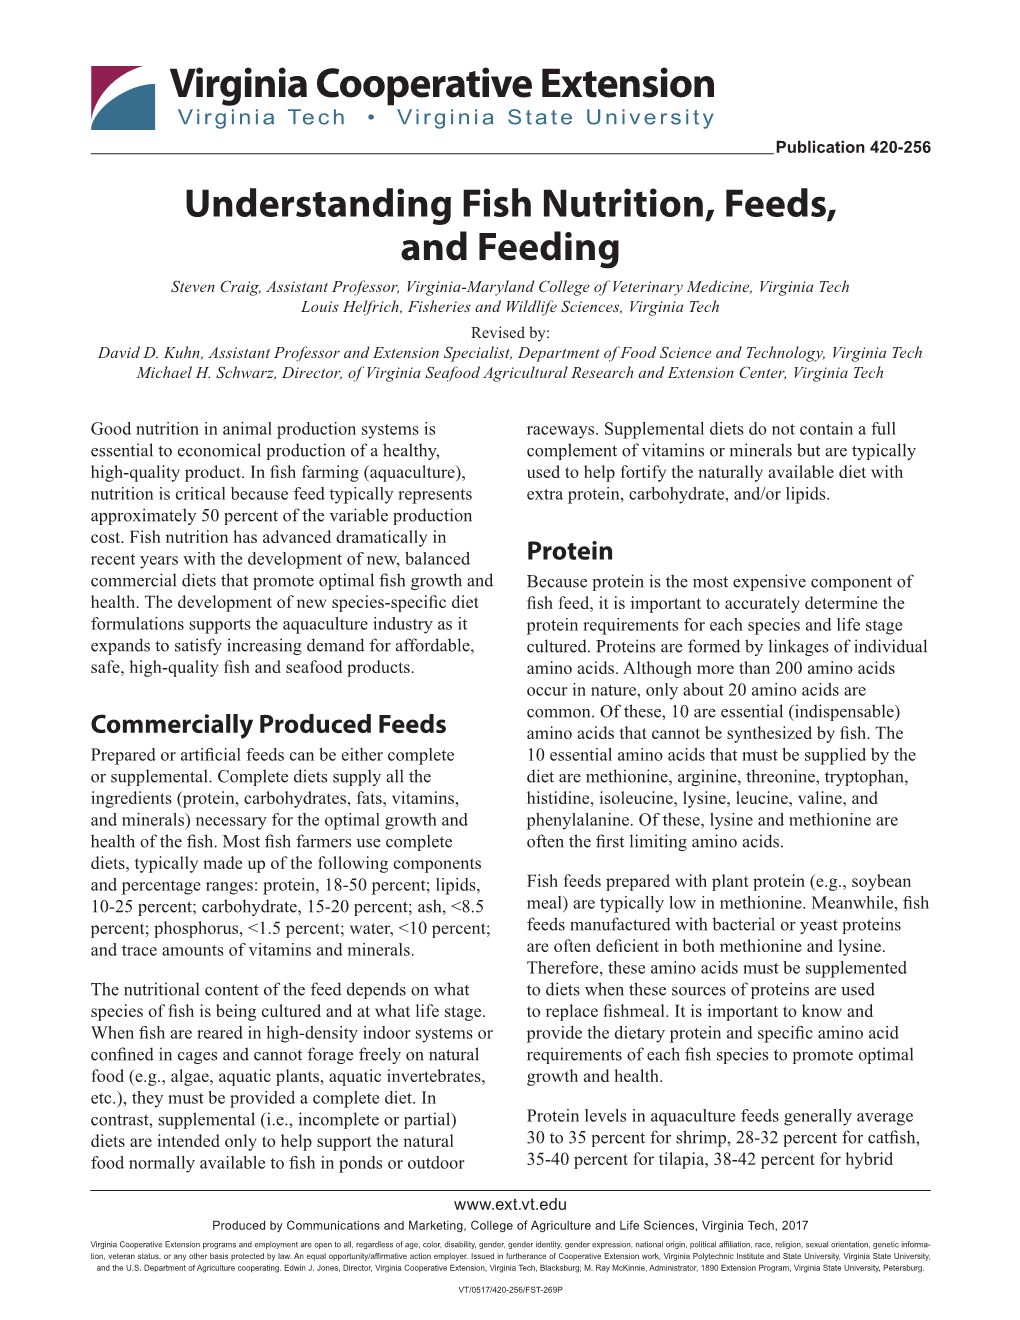 Understanding Fish Nutrition, Feeds, and Feeding